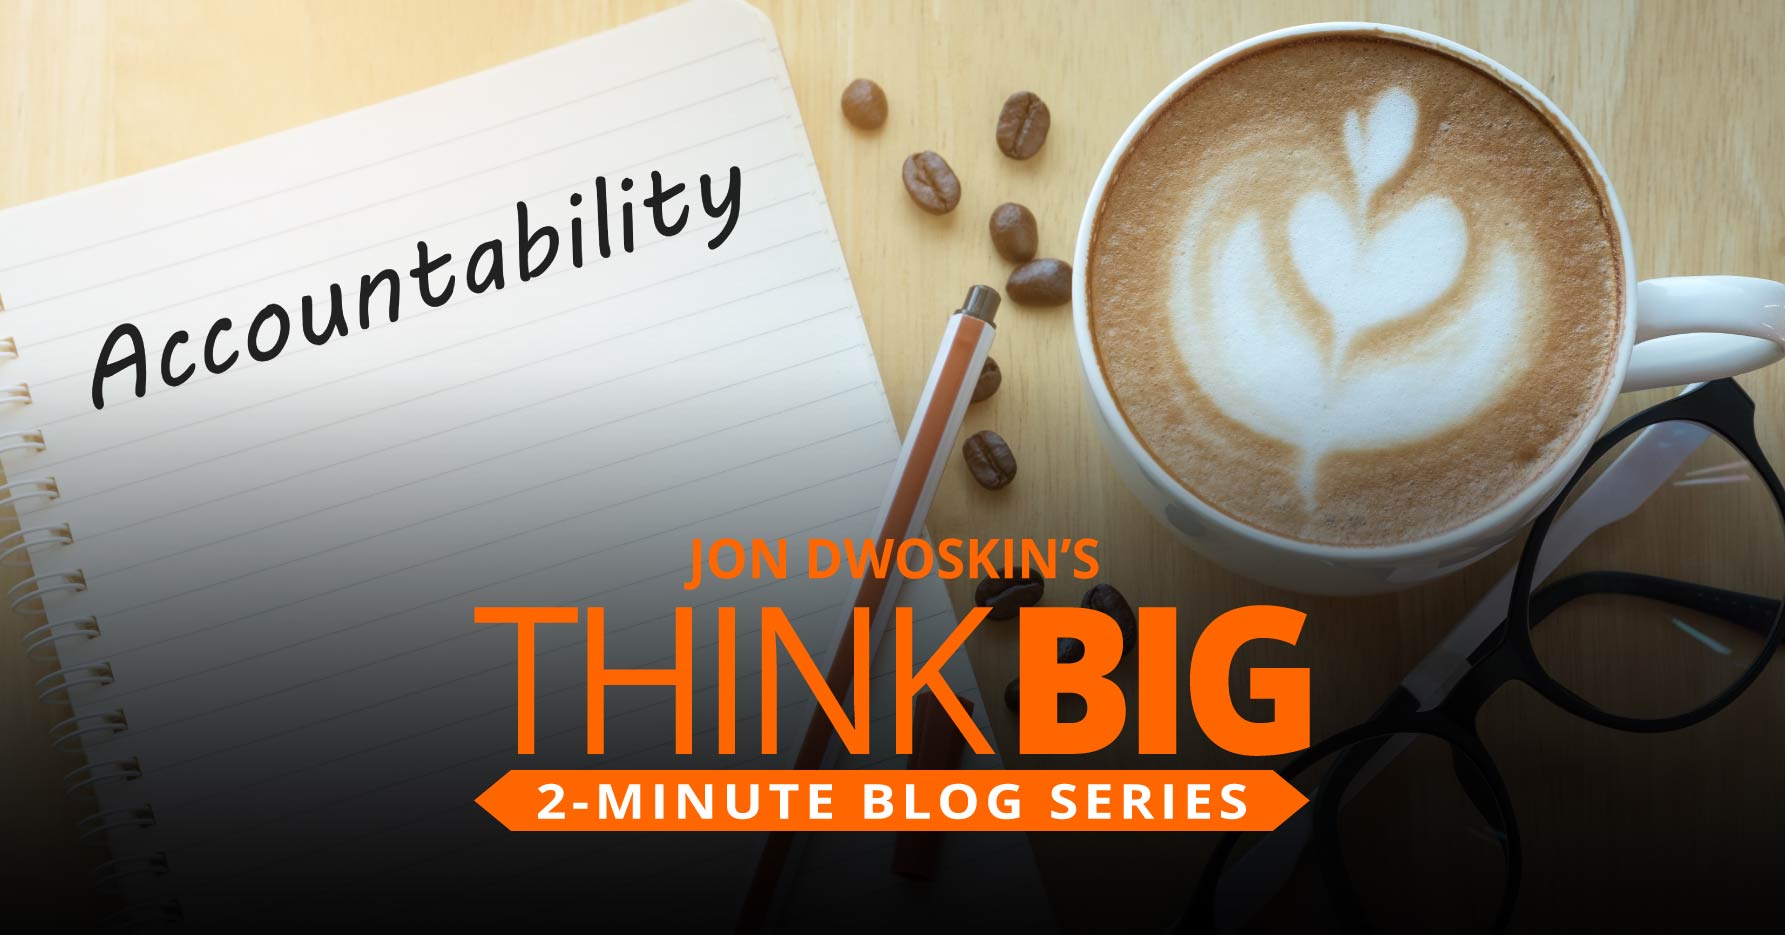 THINK Big 2-Minute Blog: The Art and Science of Accountability